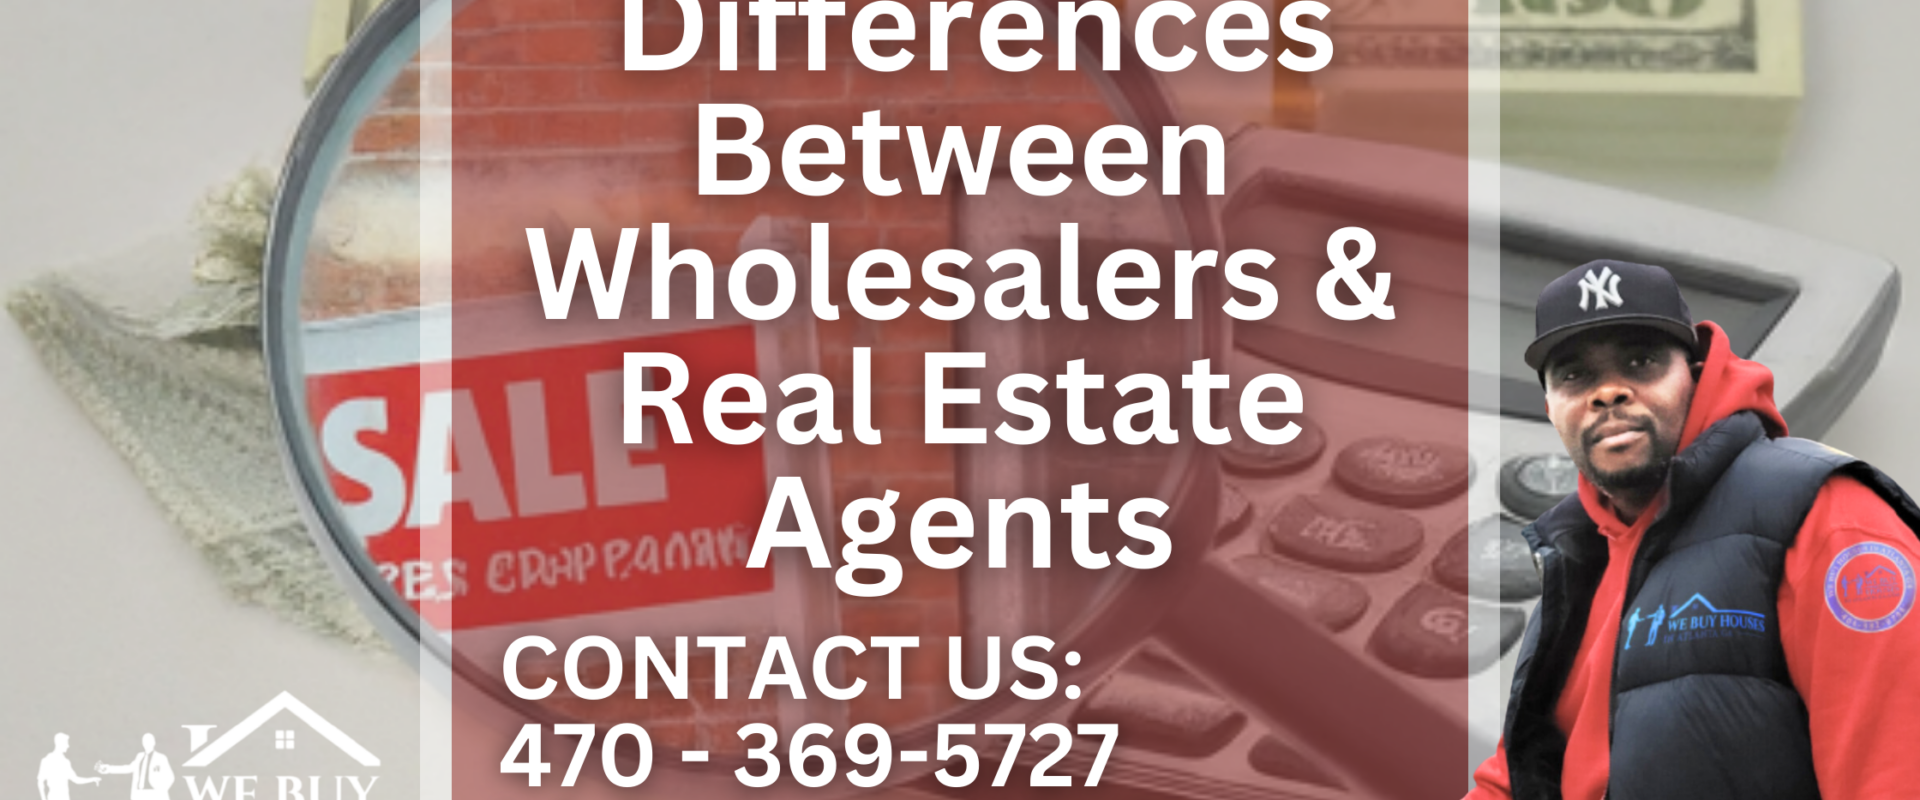 _Differences Between Wholesalers & Real Estate Agents